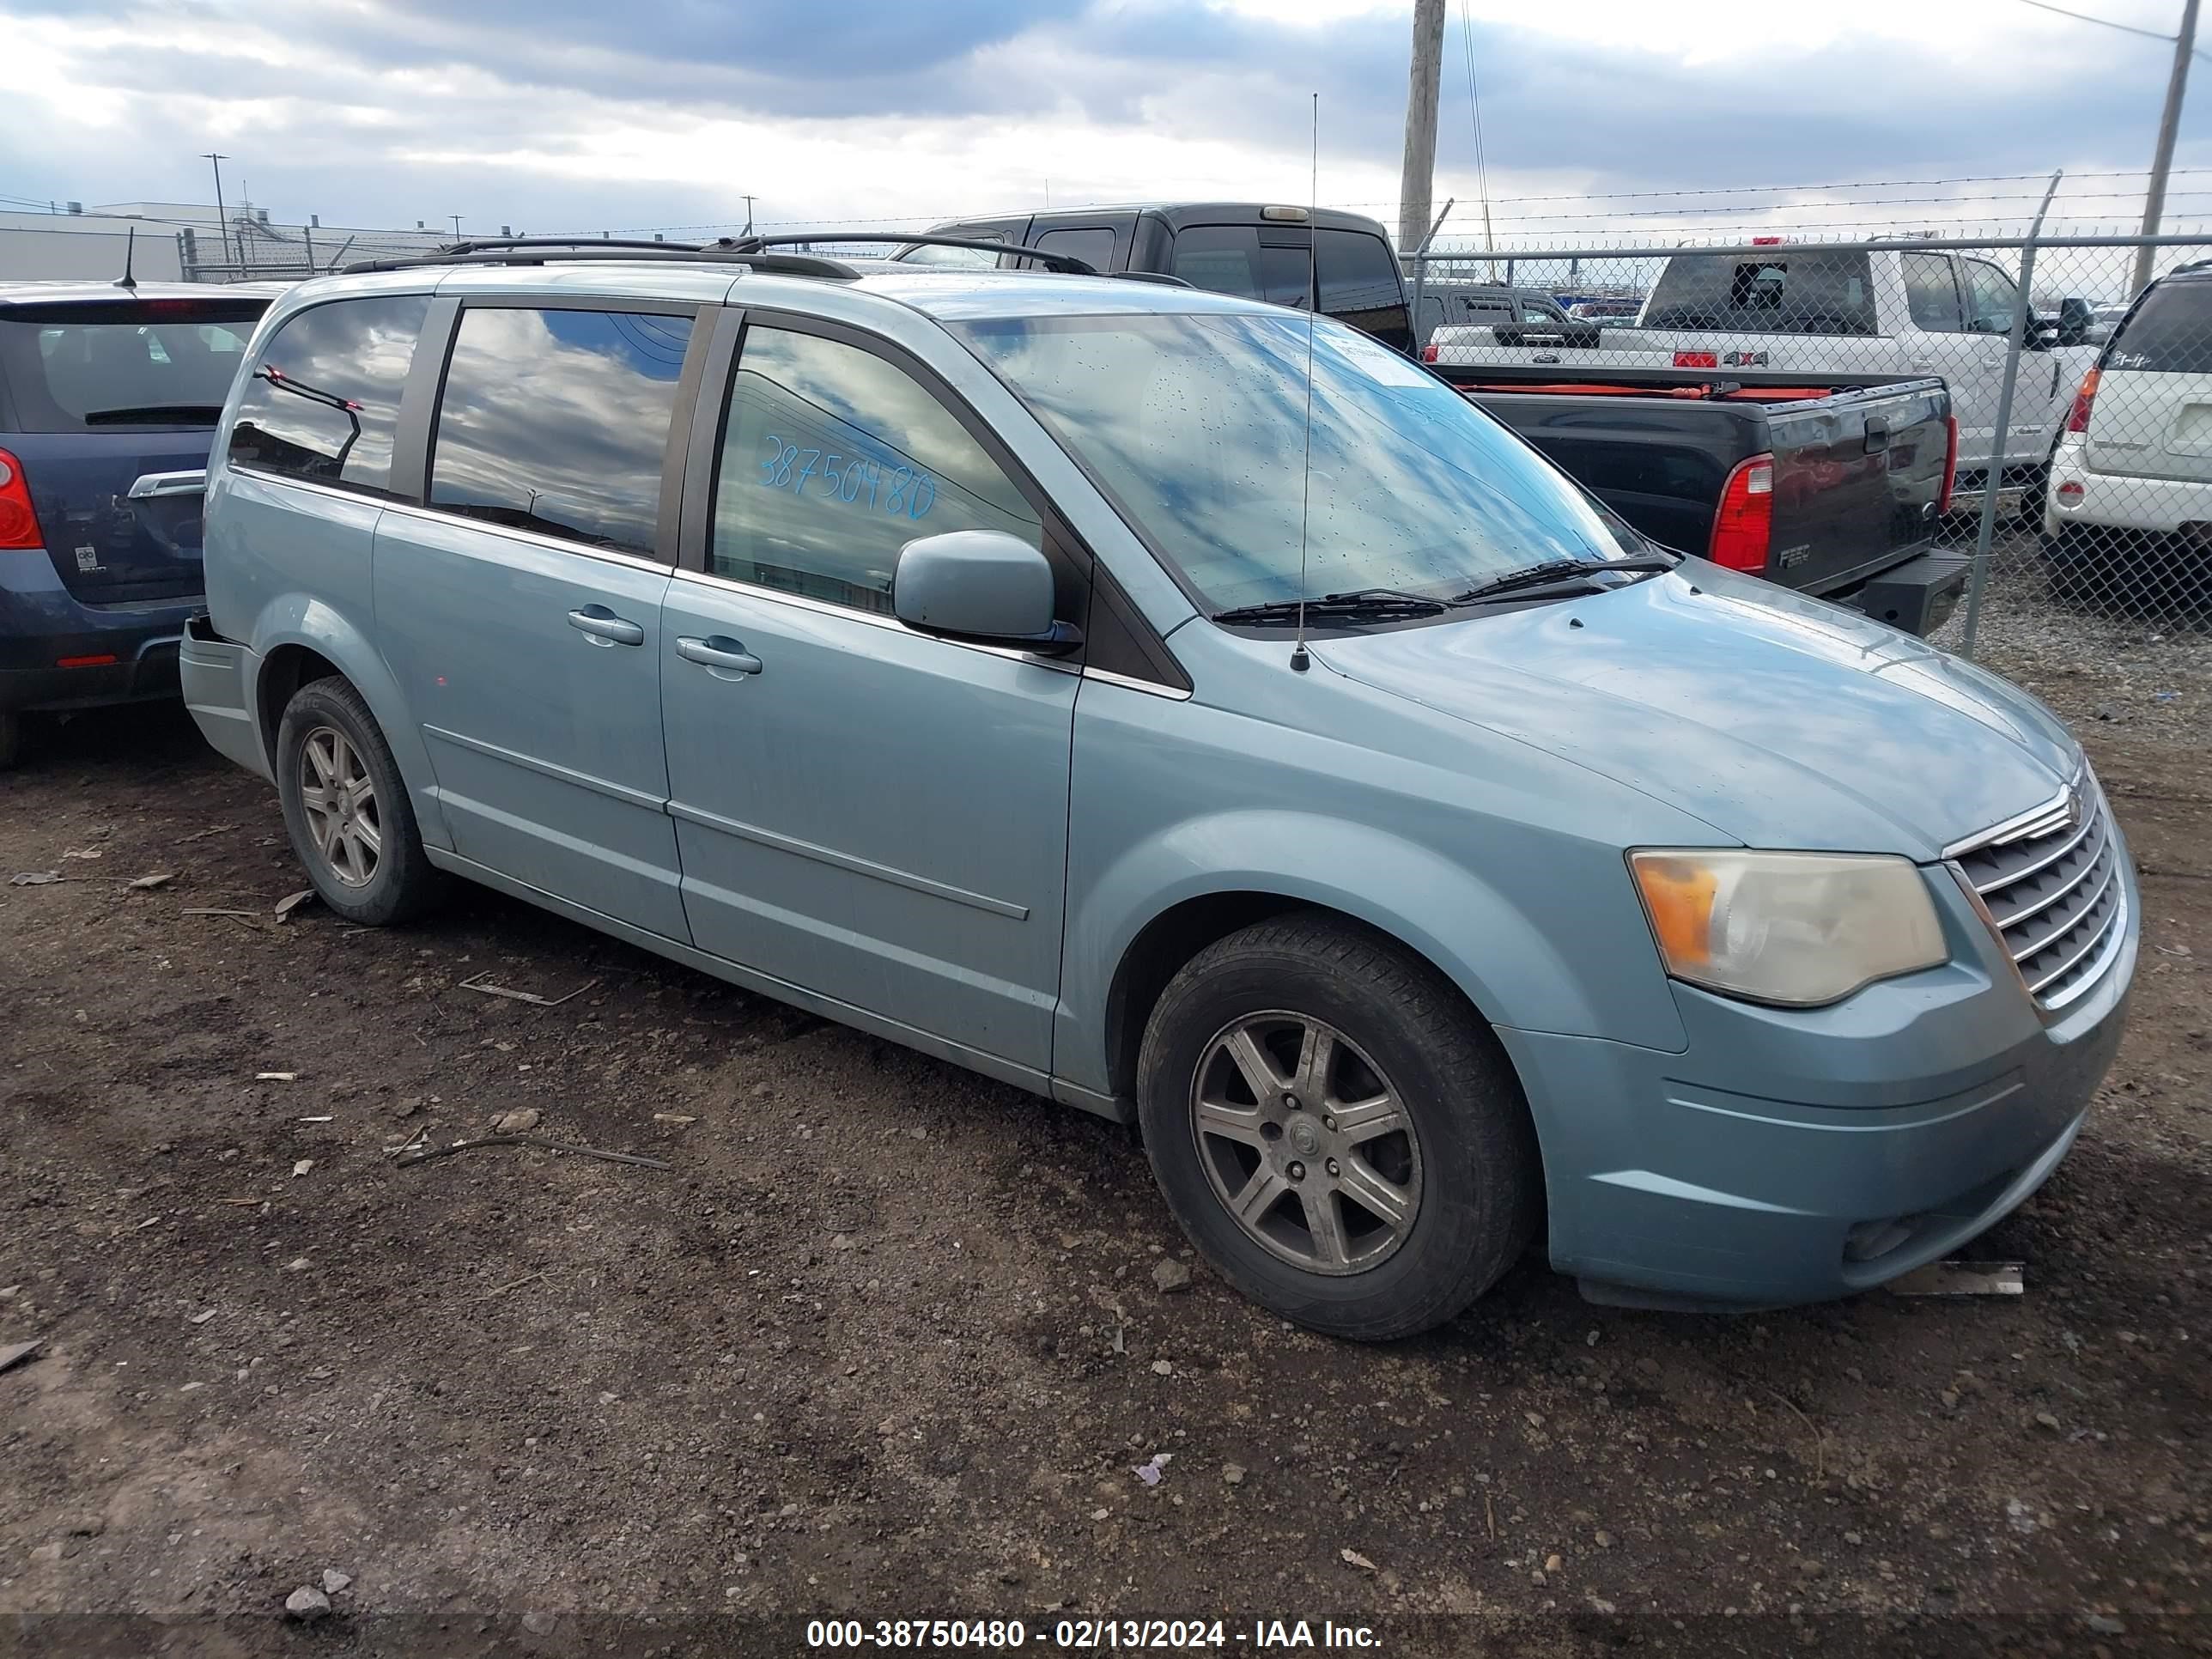 2A8HR54P08R679050  - CHRYSLER TOWN & COUNTRY  2008 IMG - 0